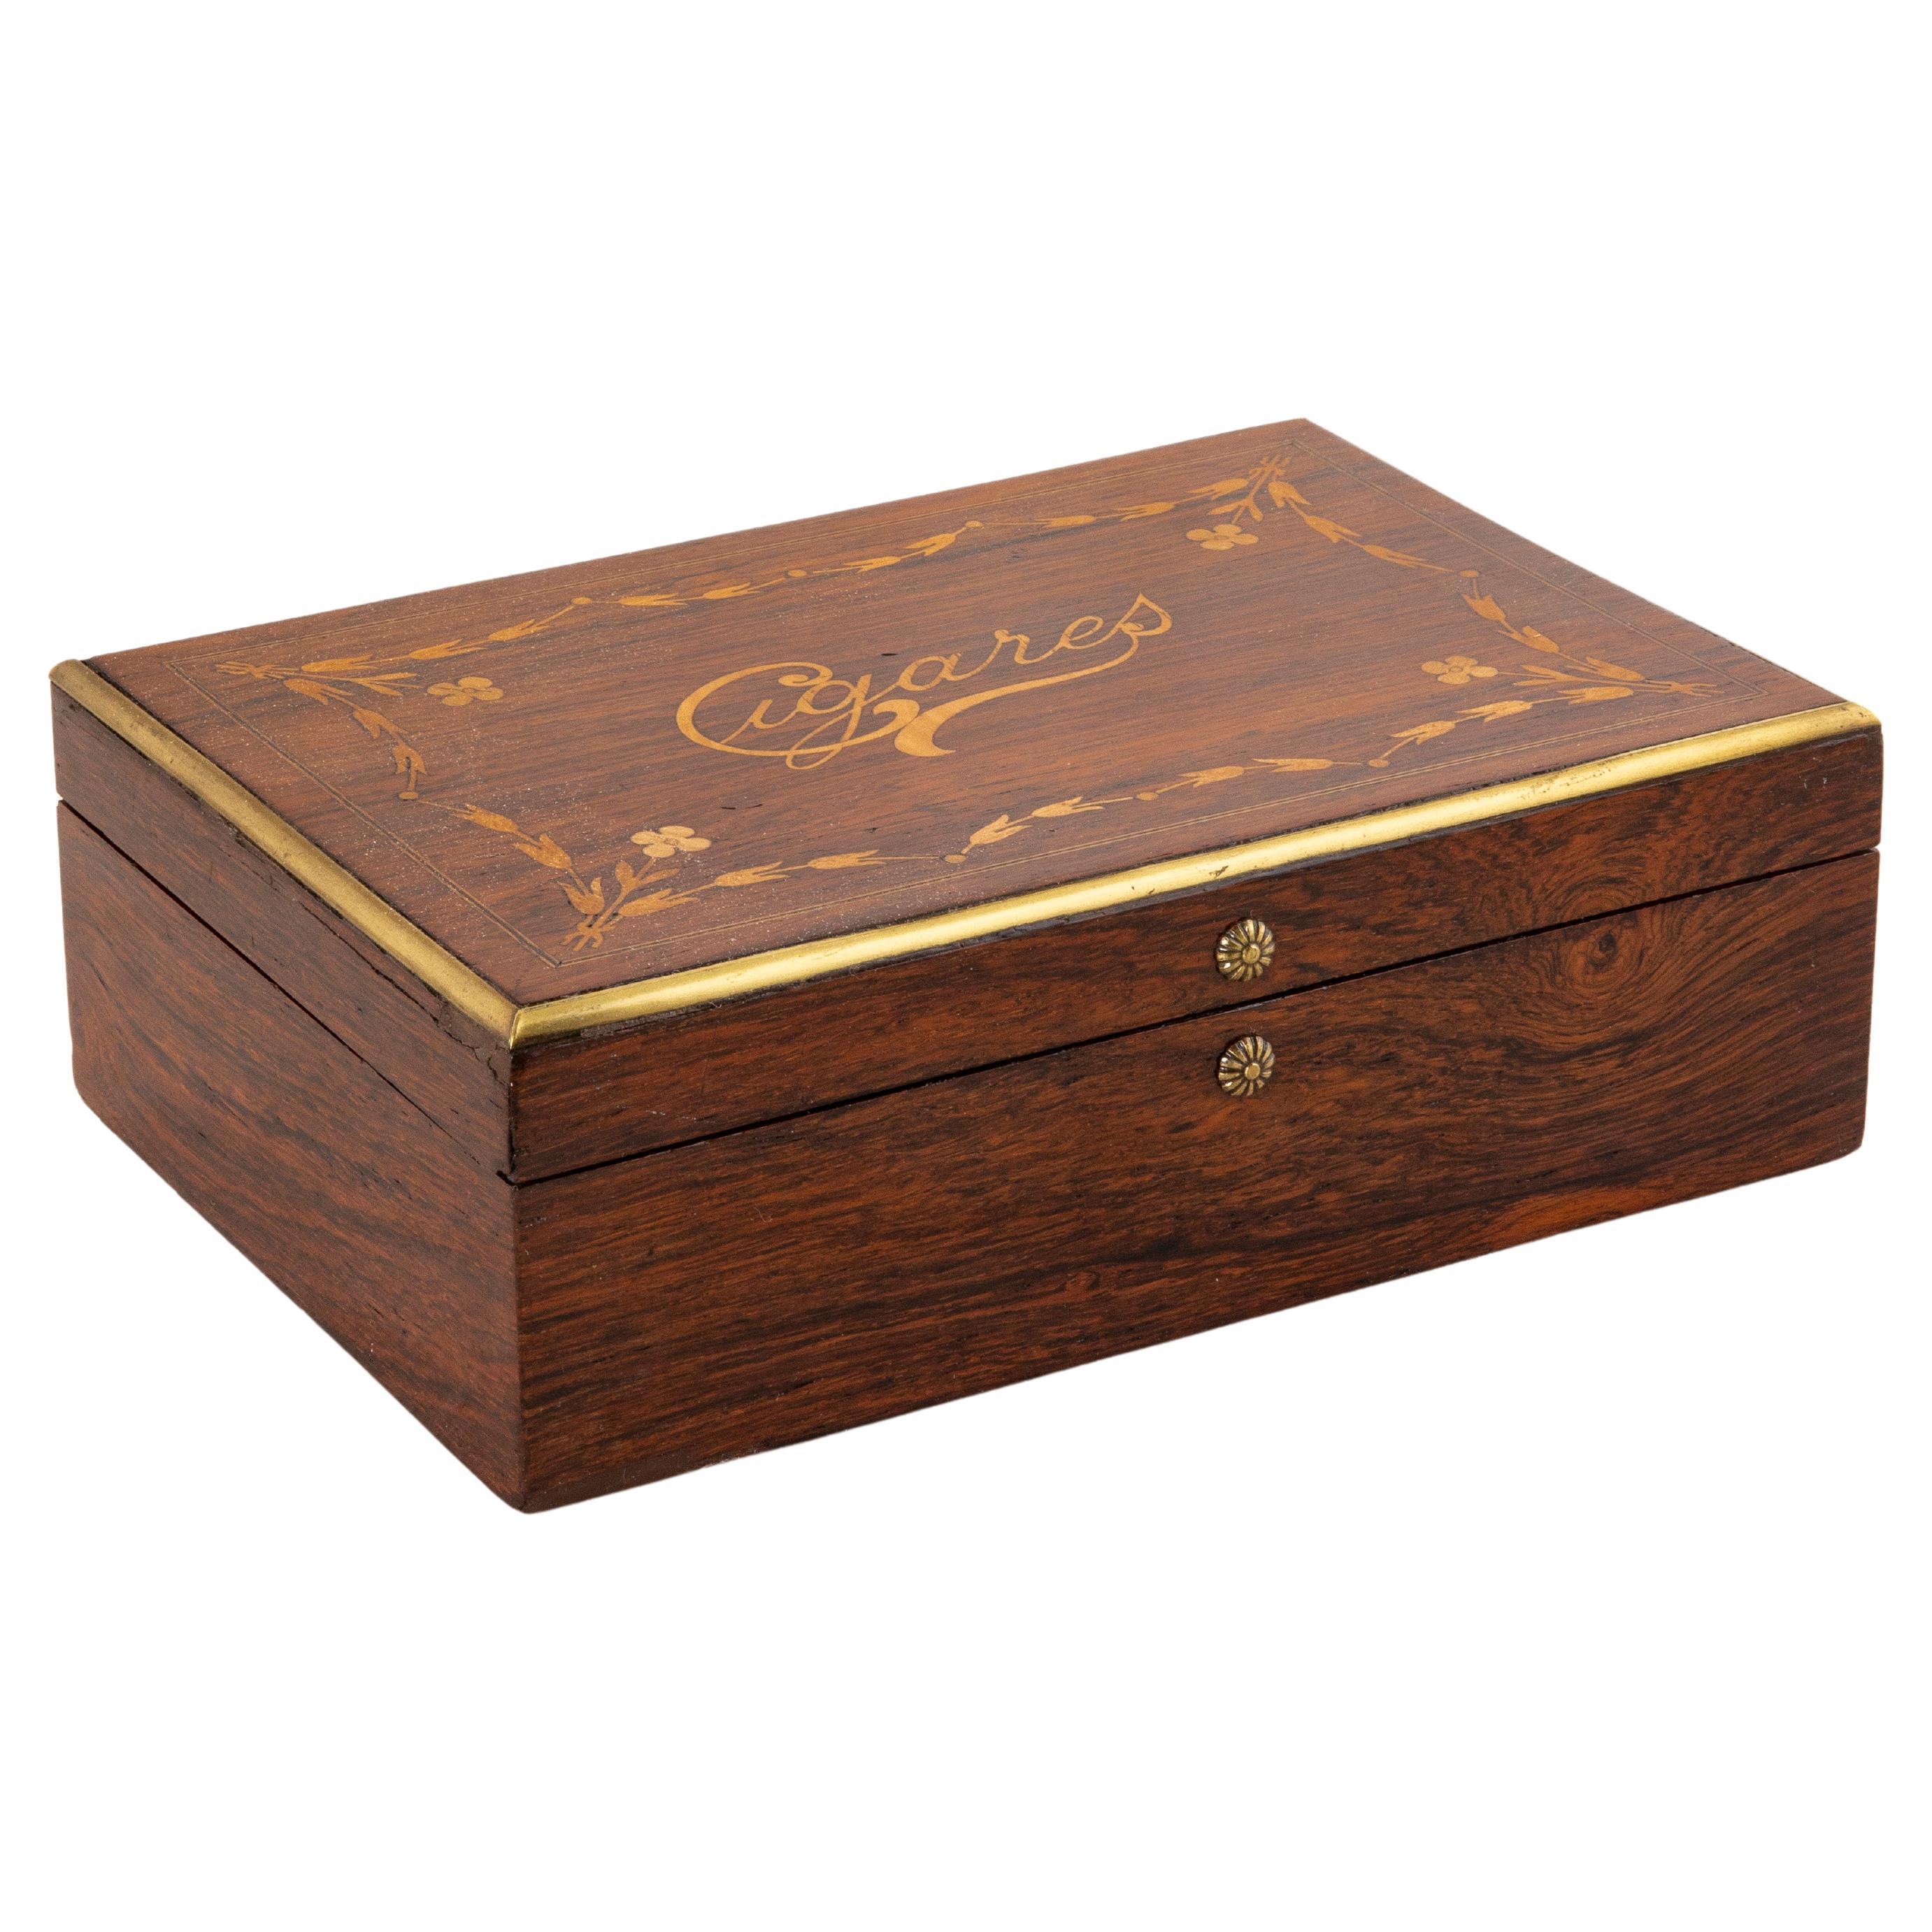 Mid-19th Century French Napoleon III Period Marquetry Cigar Box, Music Box For Sale